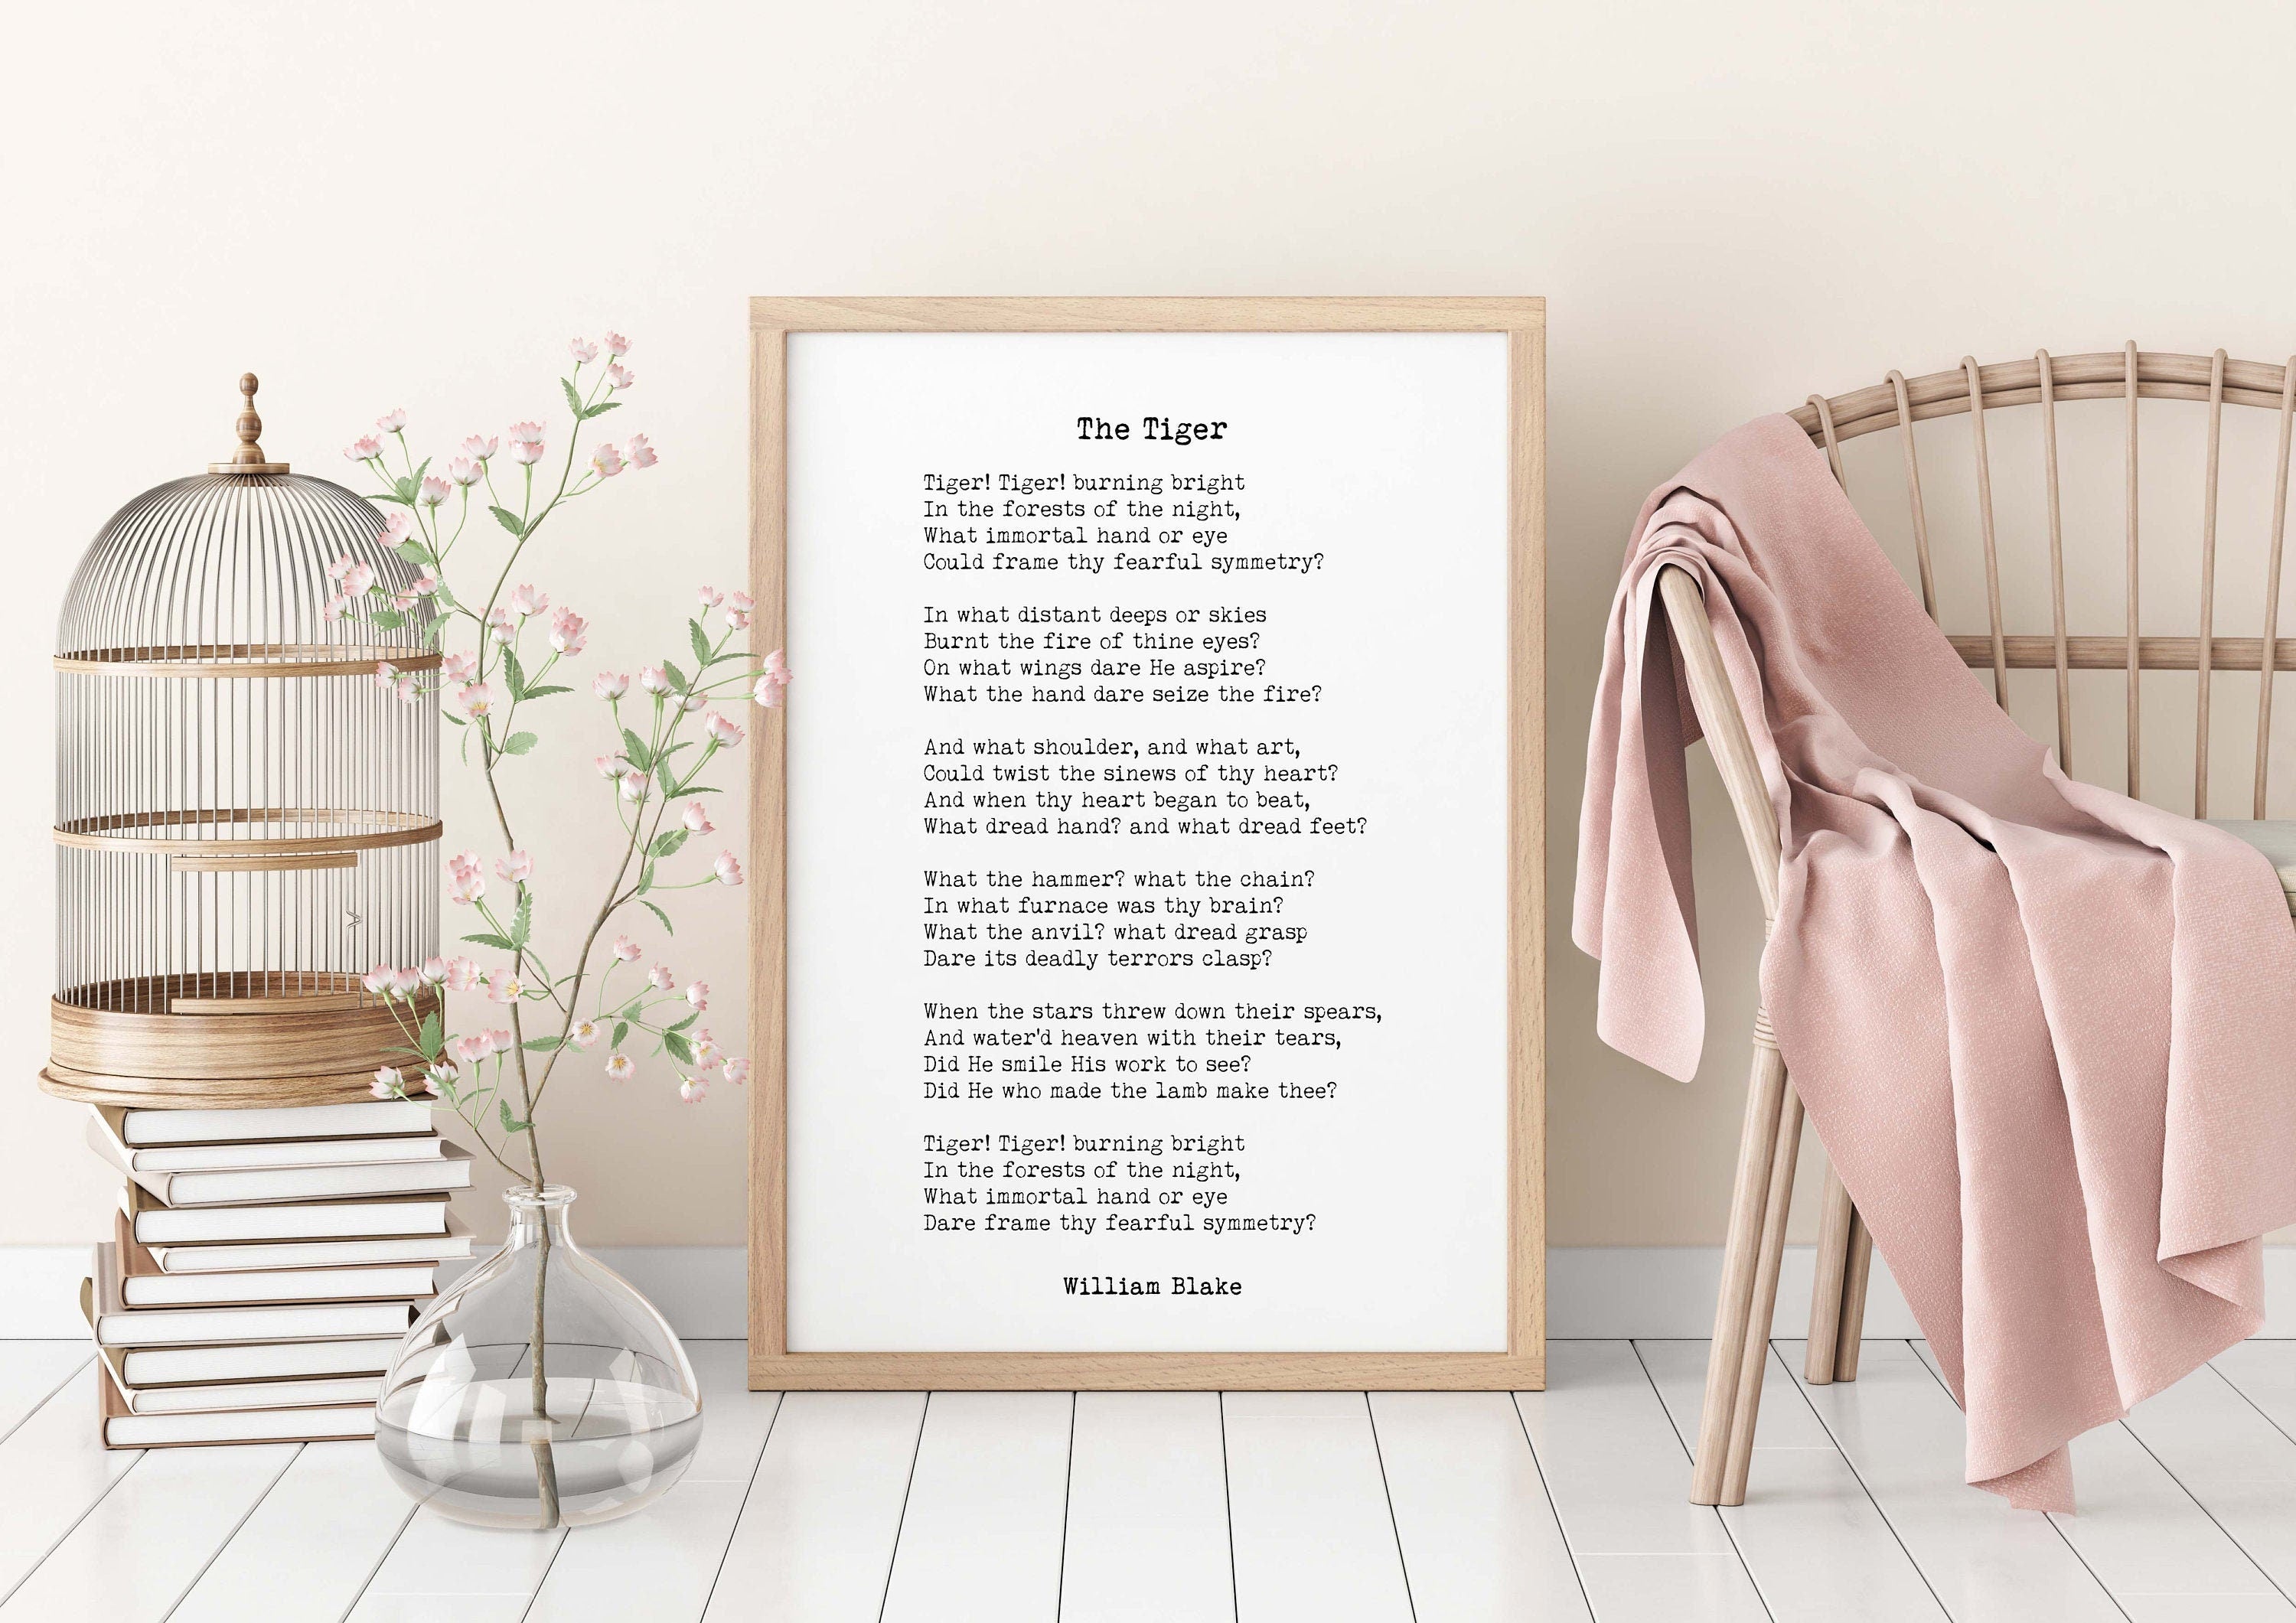 William Blake The Tiger Poem Wall Art Print in Black & White Art for Home Wall Decor Unframed